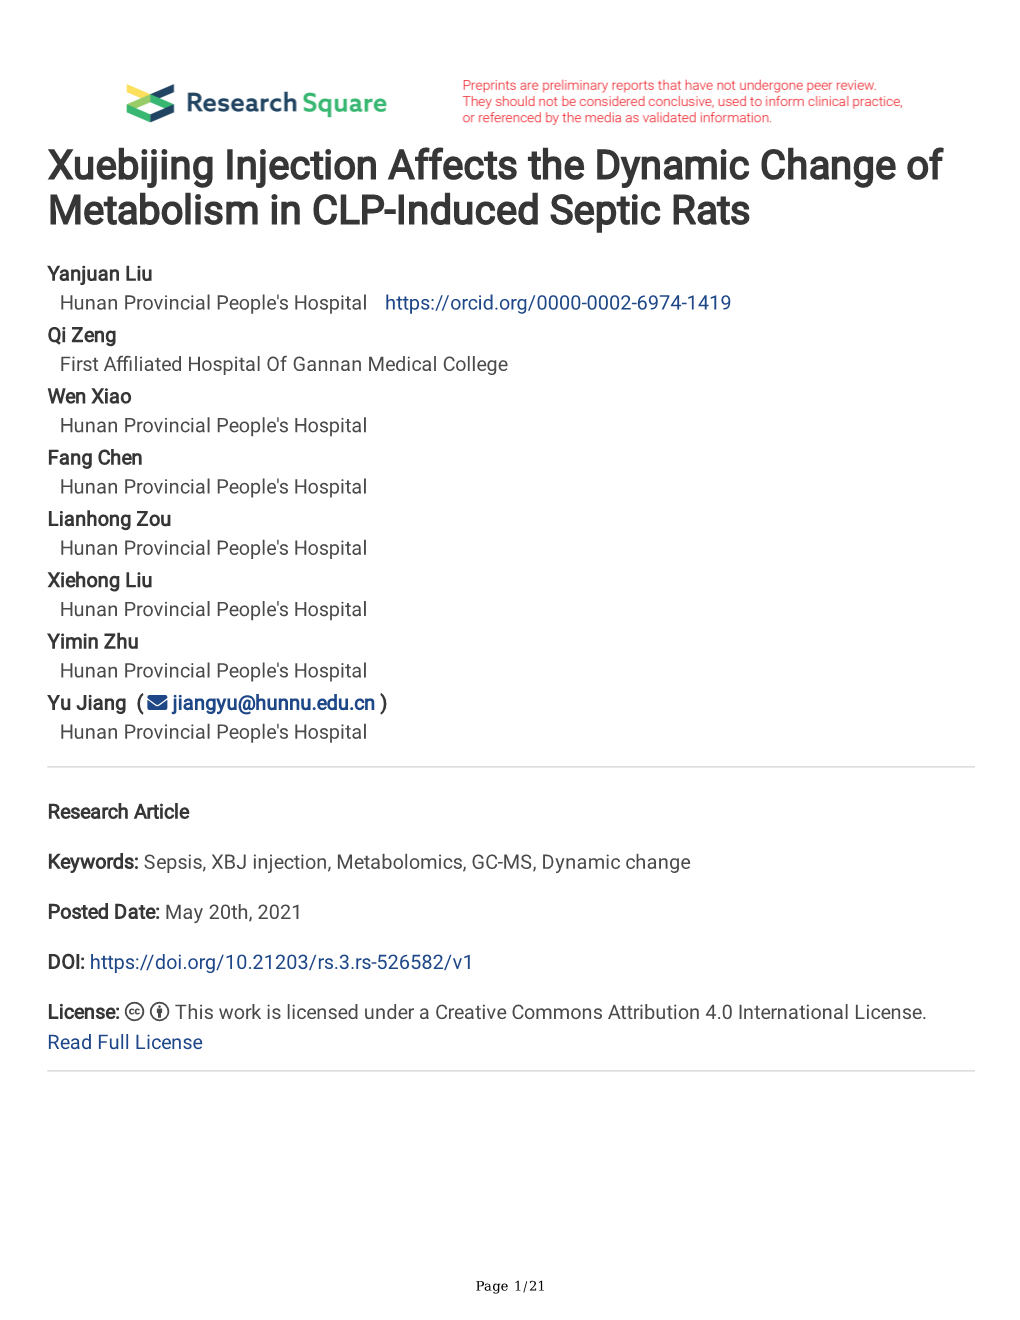 Xuebijing Injection Affects the Dynamic Change of Metabolism in CLP-Induced Septic Rats